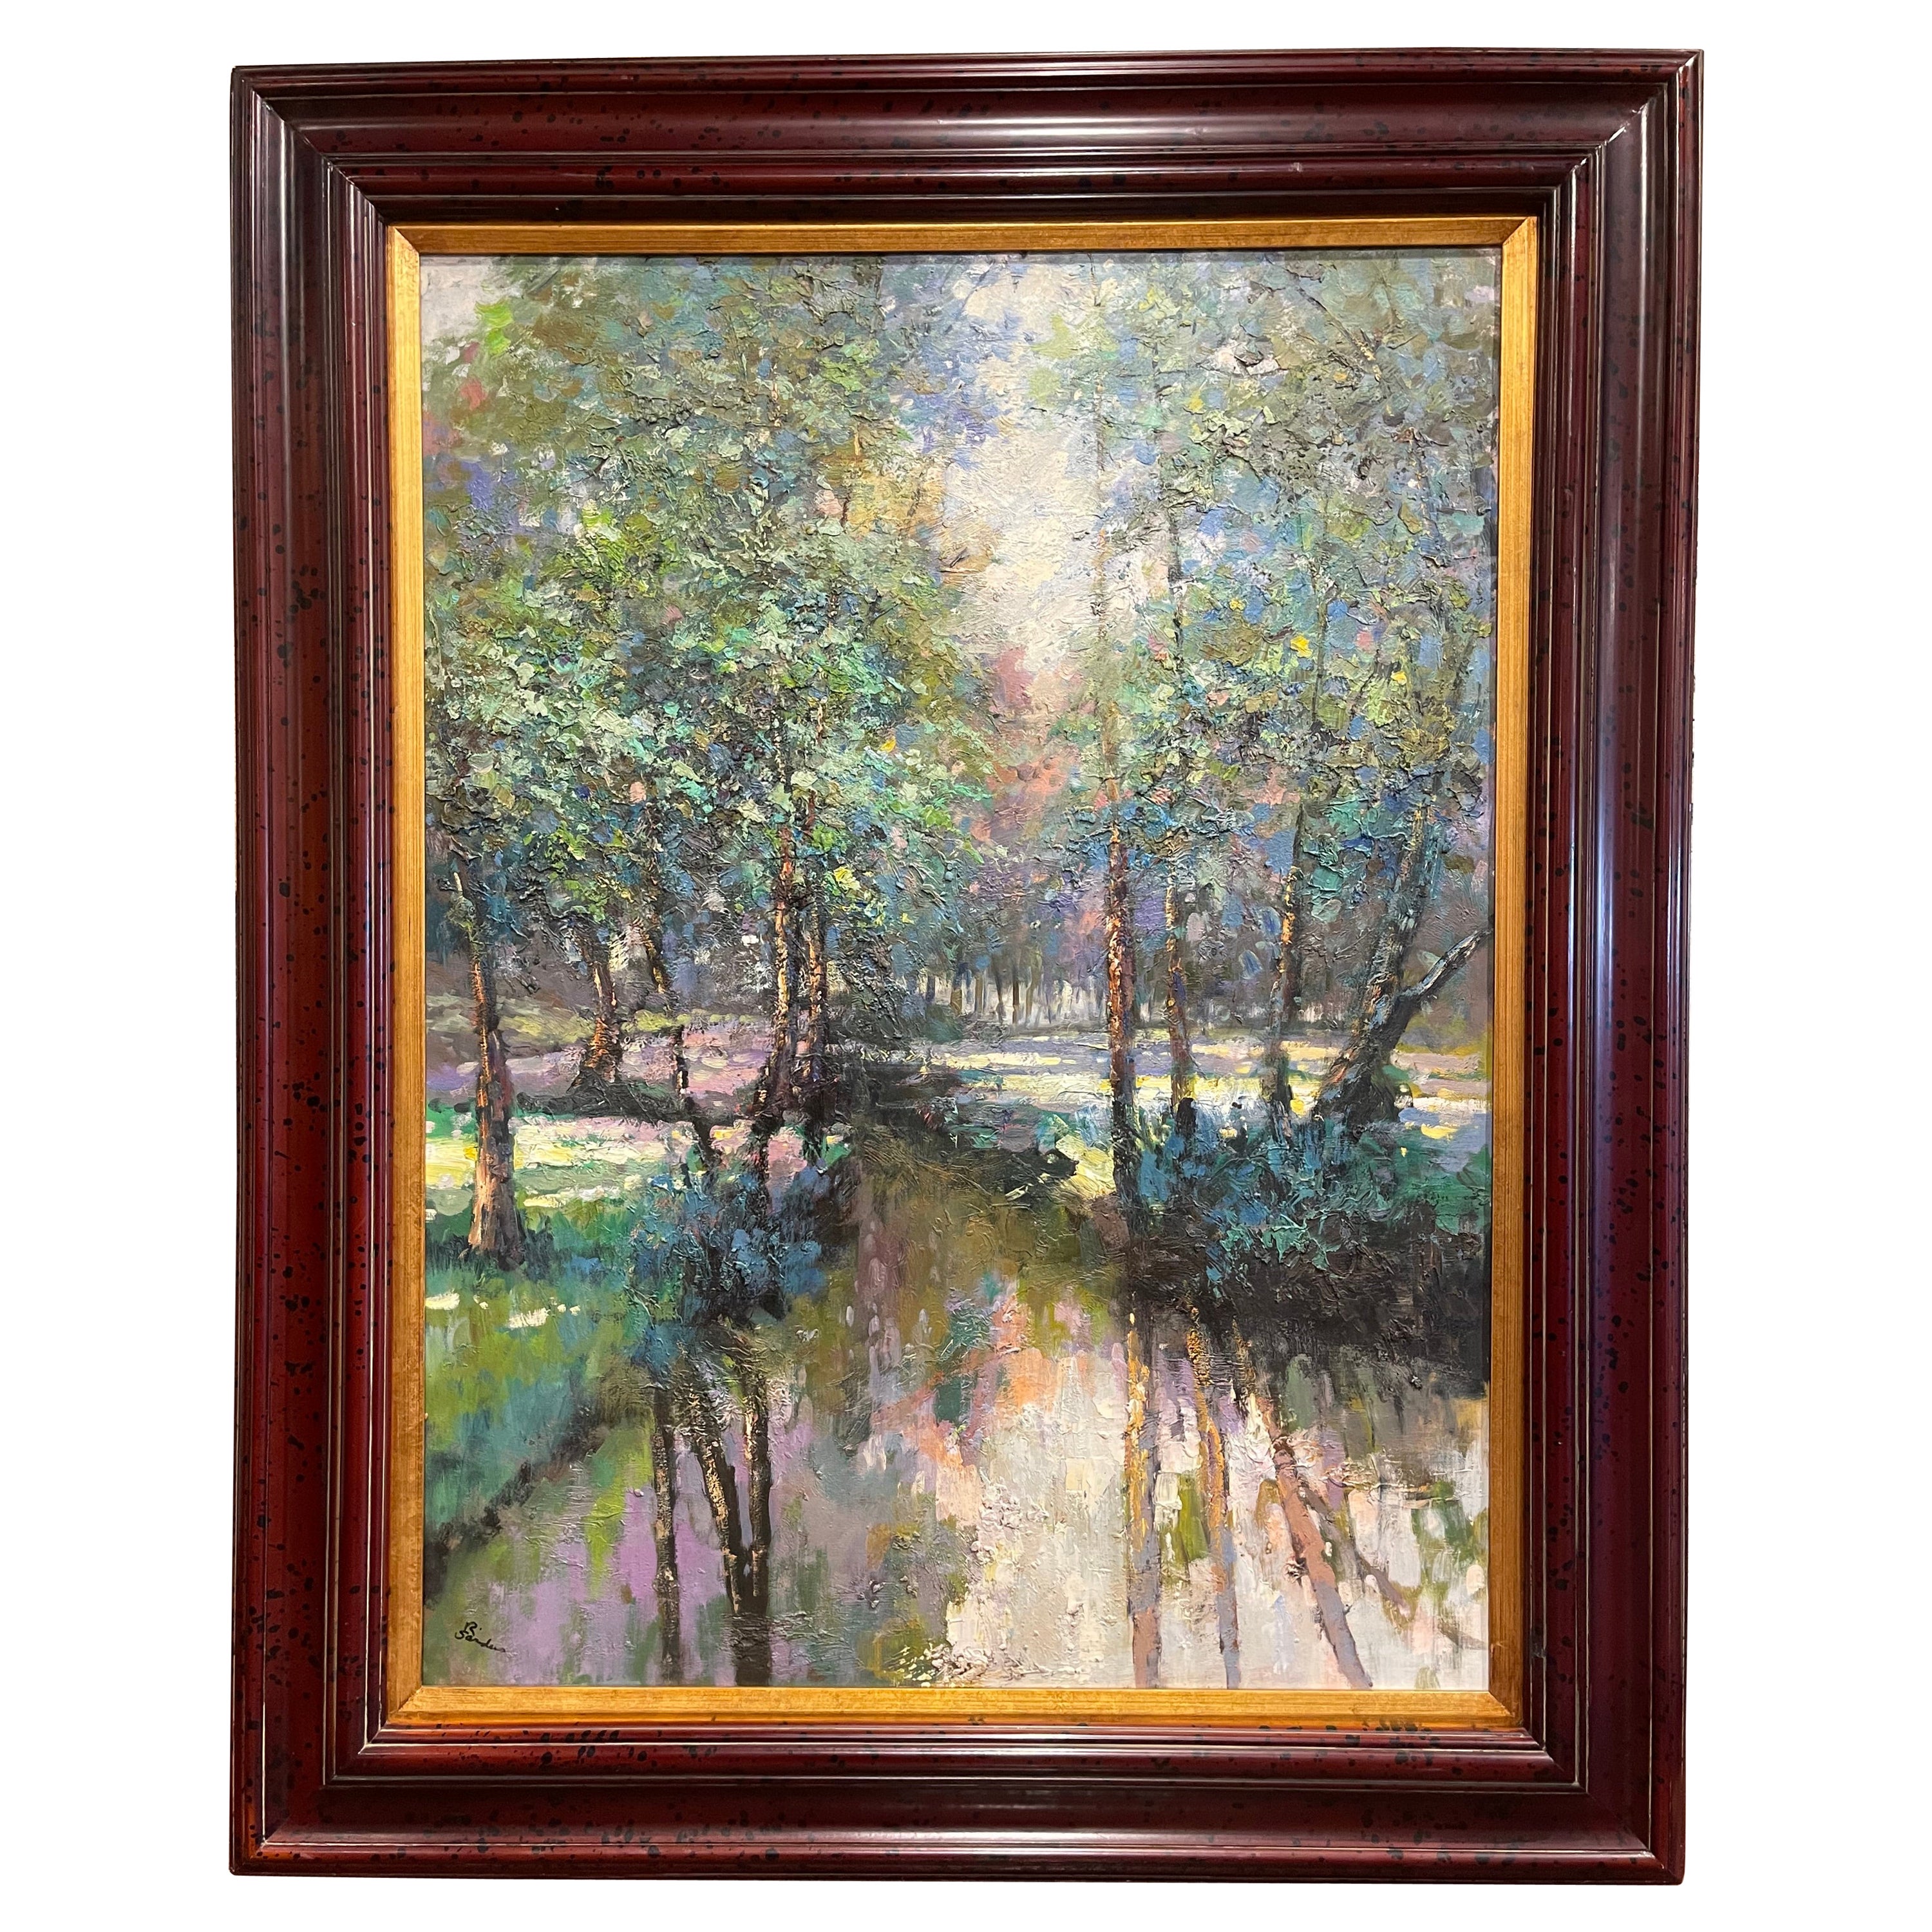 Late 20th Century Framed Oil on Canvas Landscape Painting Signed R. Sanders For Sale